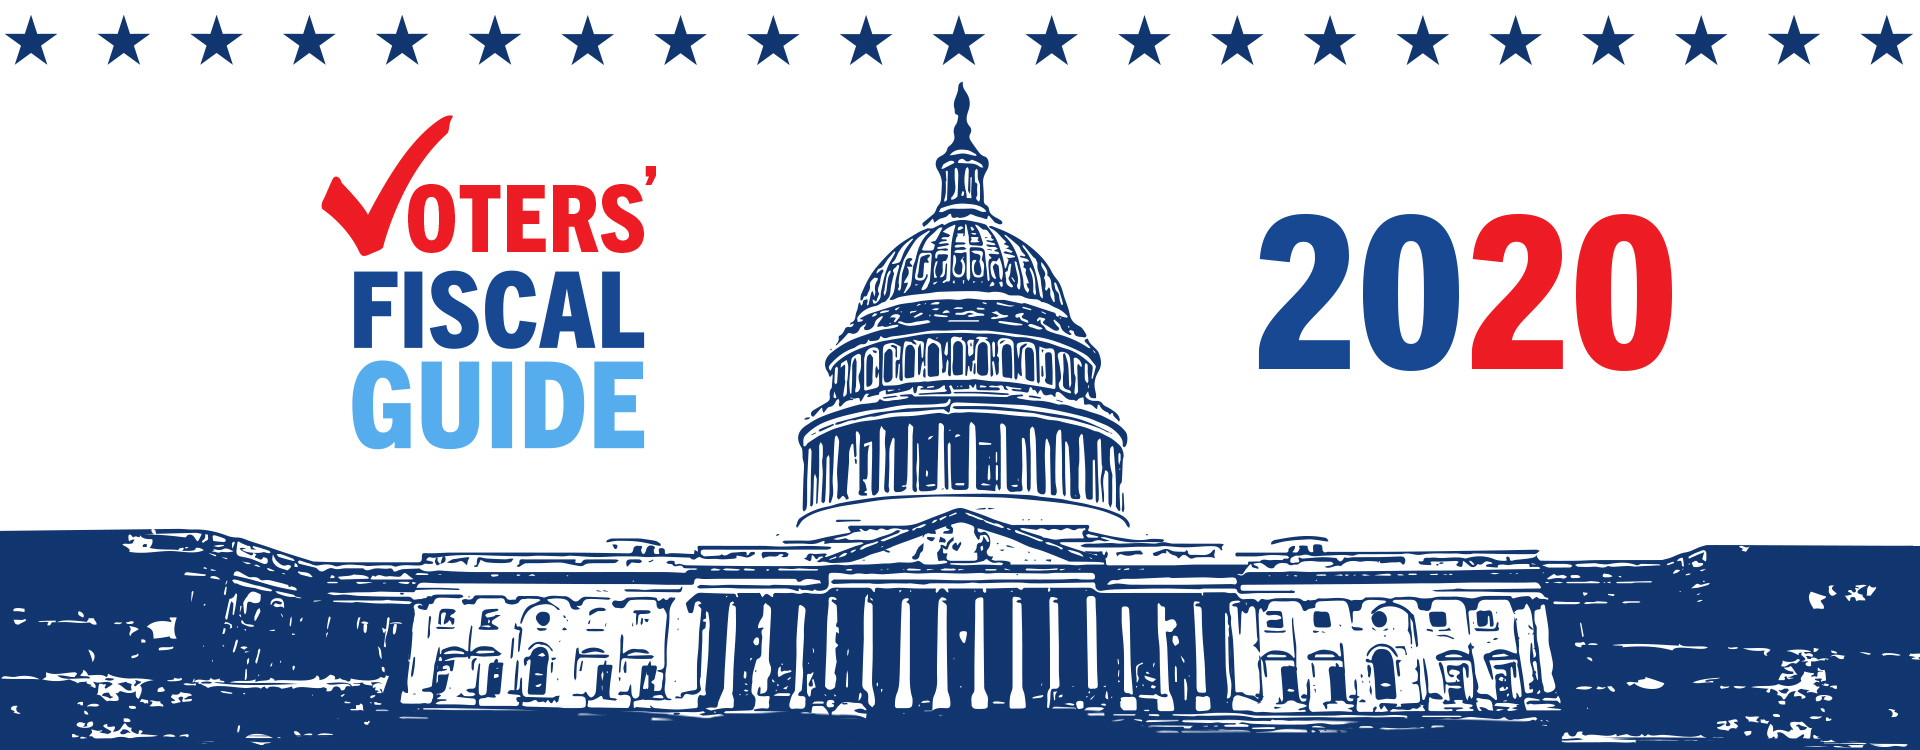 Voters' Fiscal Guide: Your Fiscal and Economic Headquarters for the 2020 Election